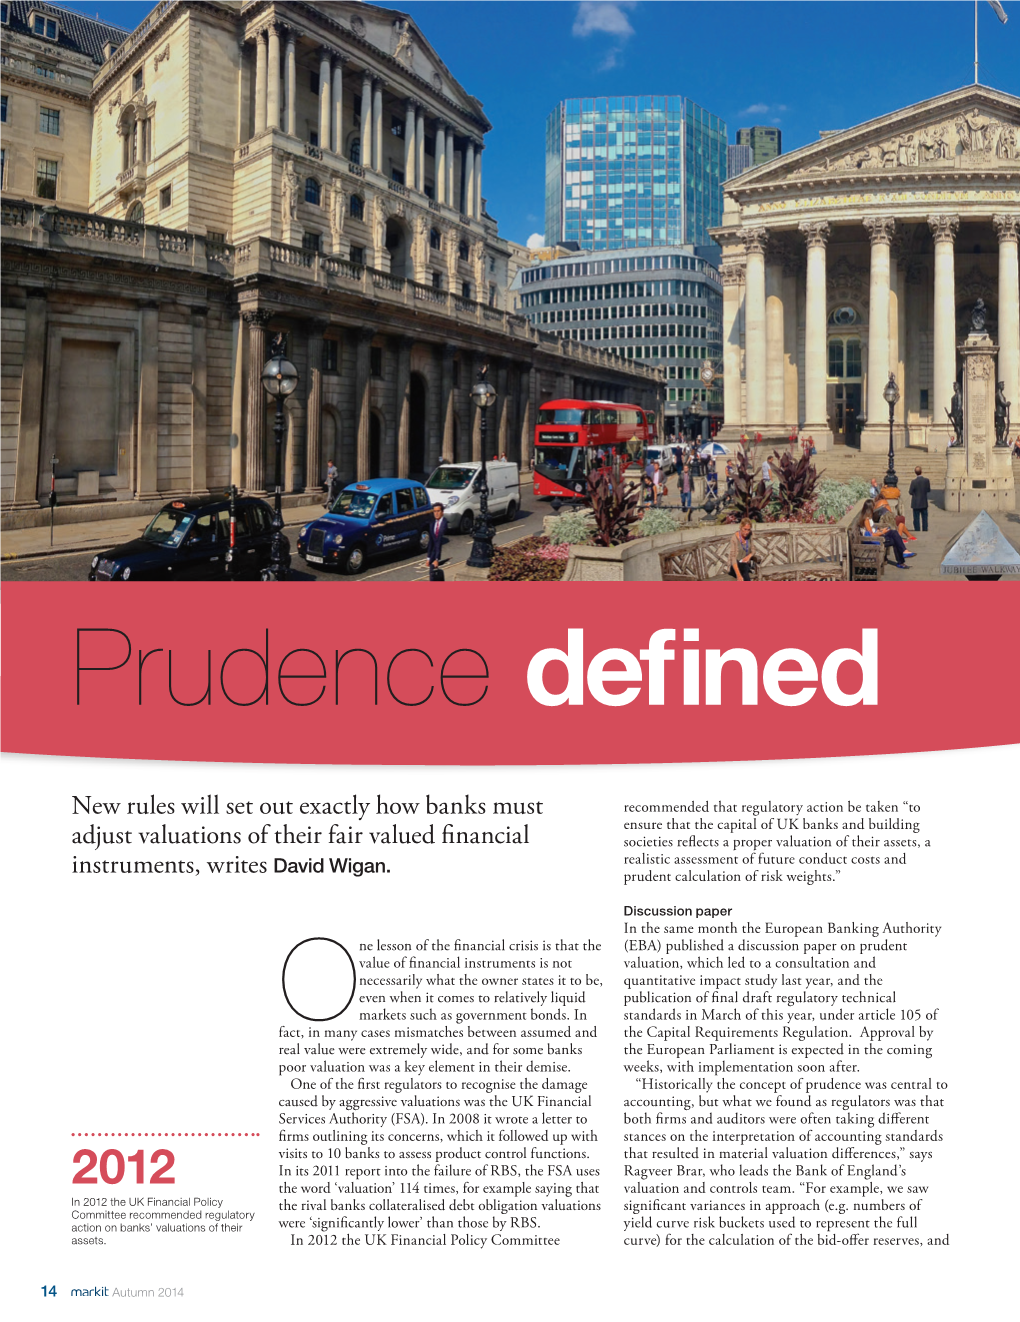 Prudence Defined